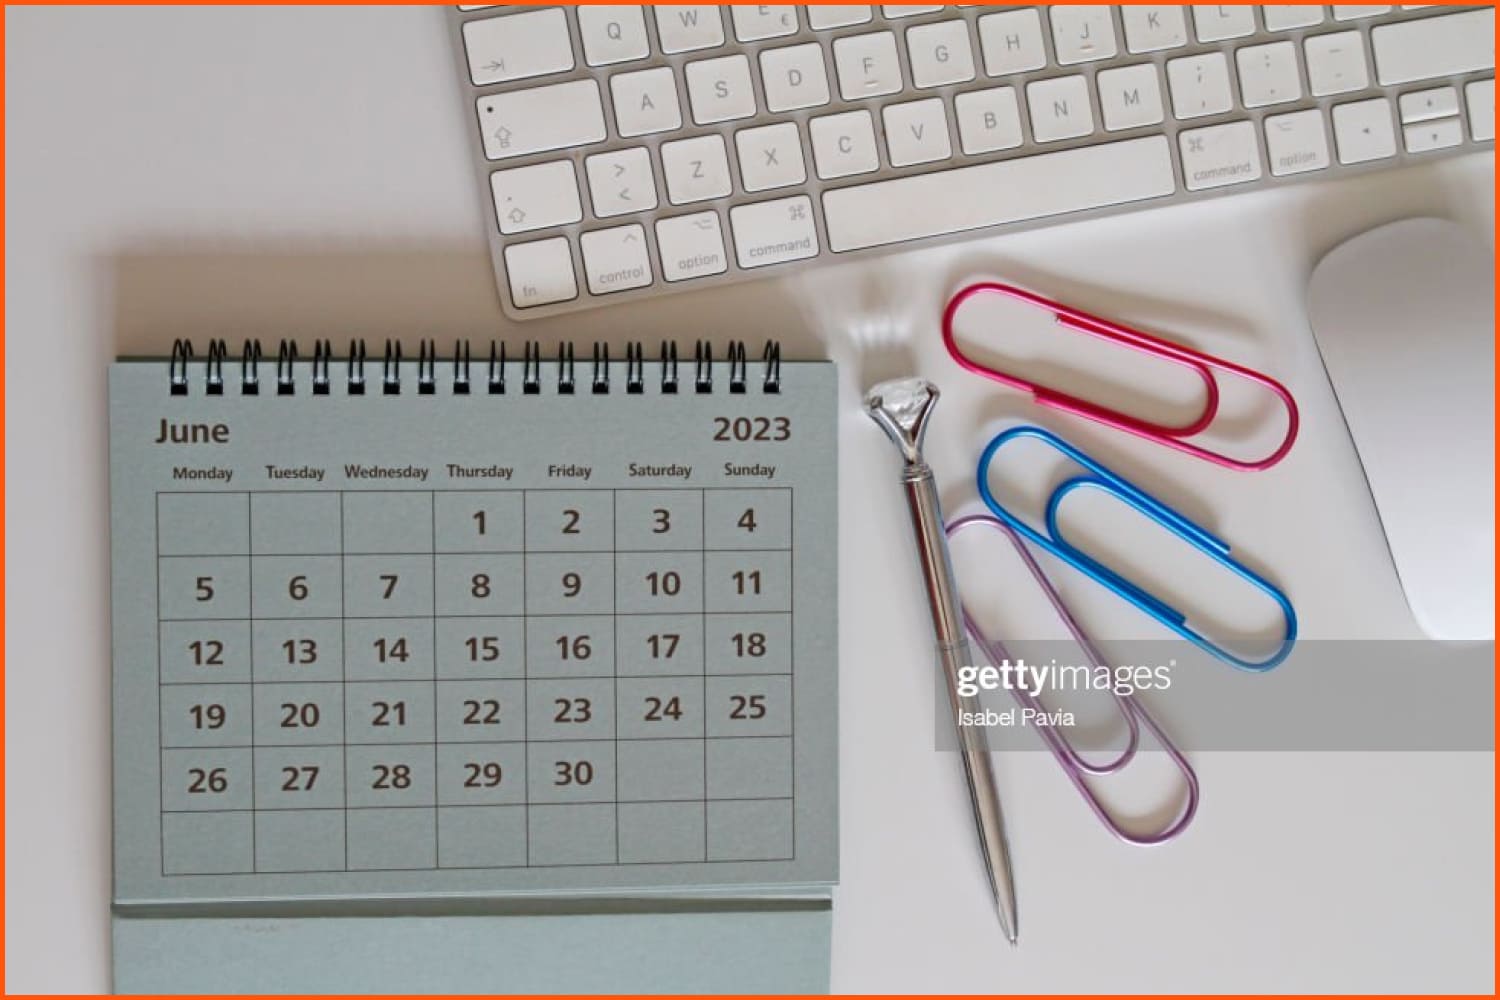 June calendar, pen, paper clips and keyboard on the table.